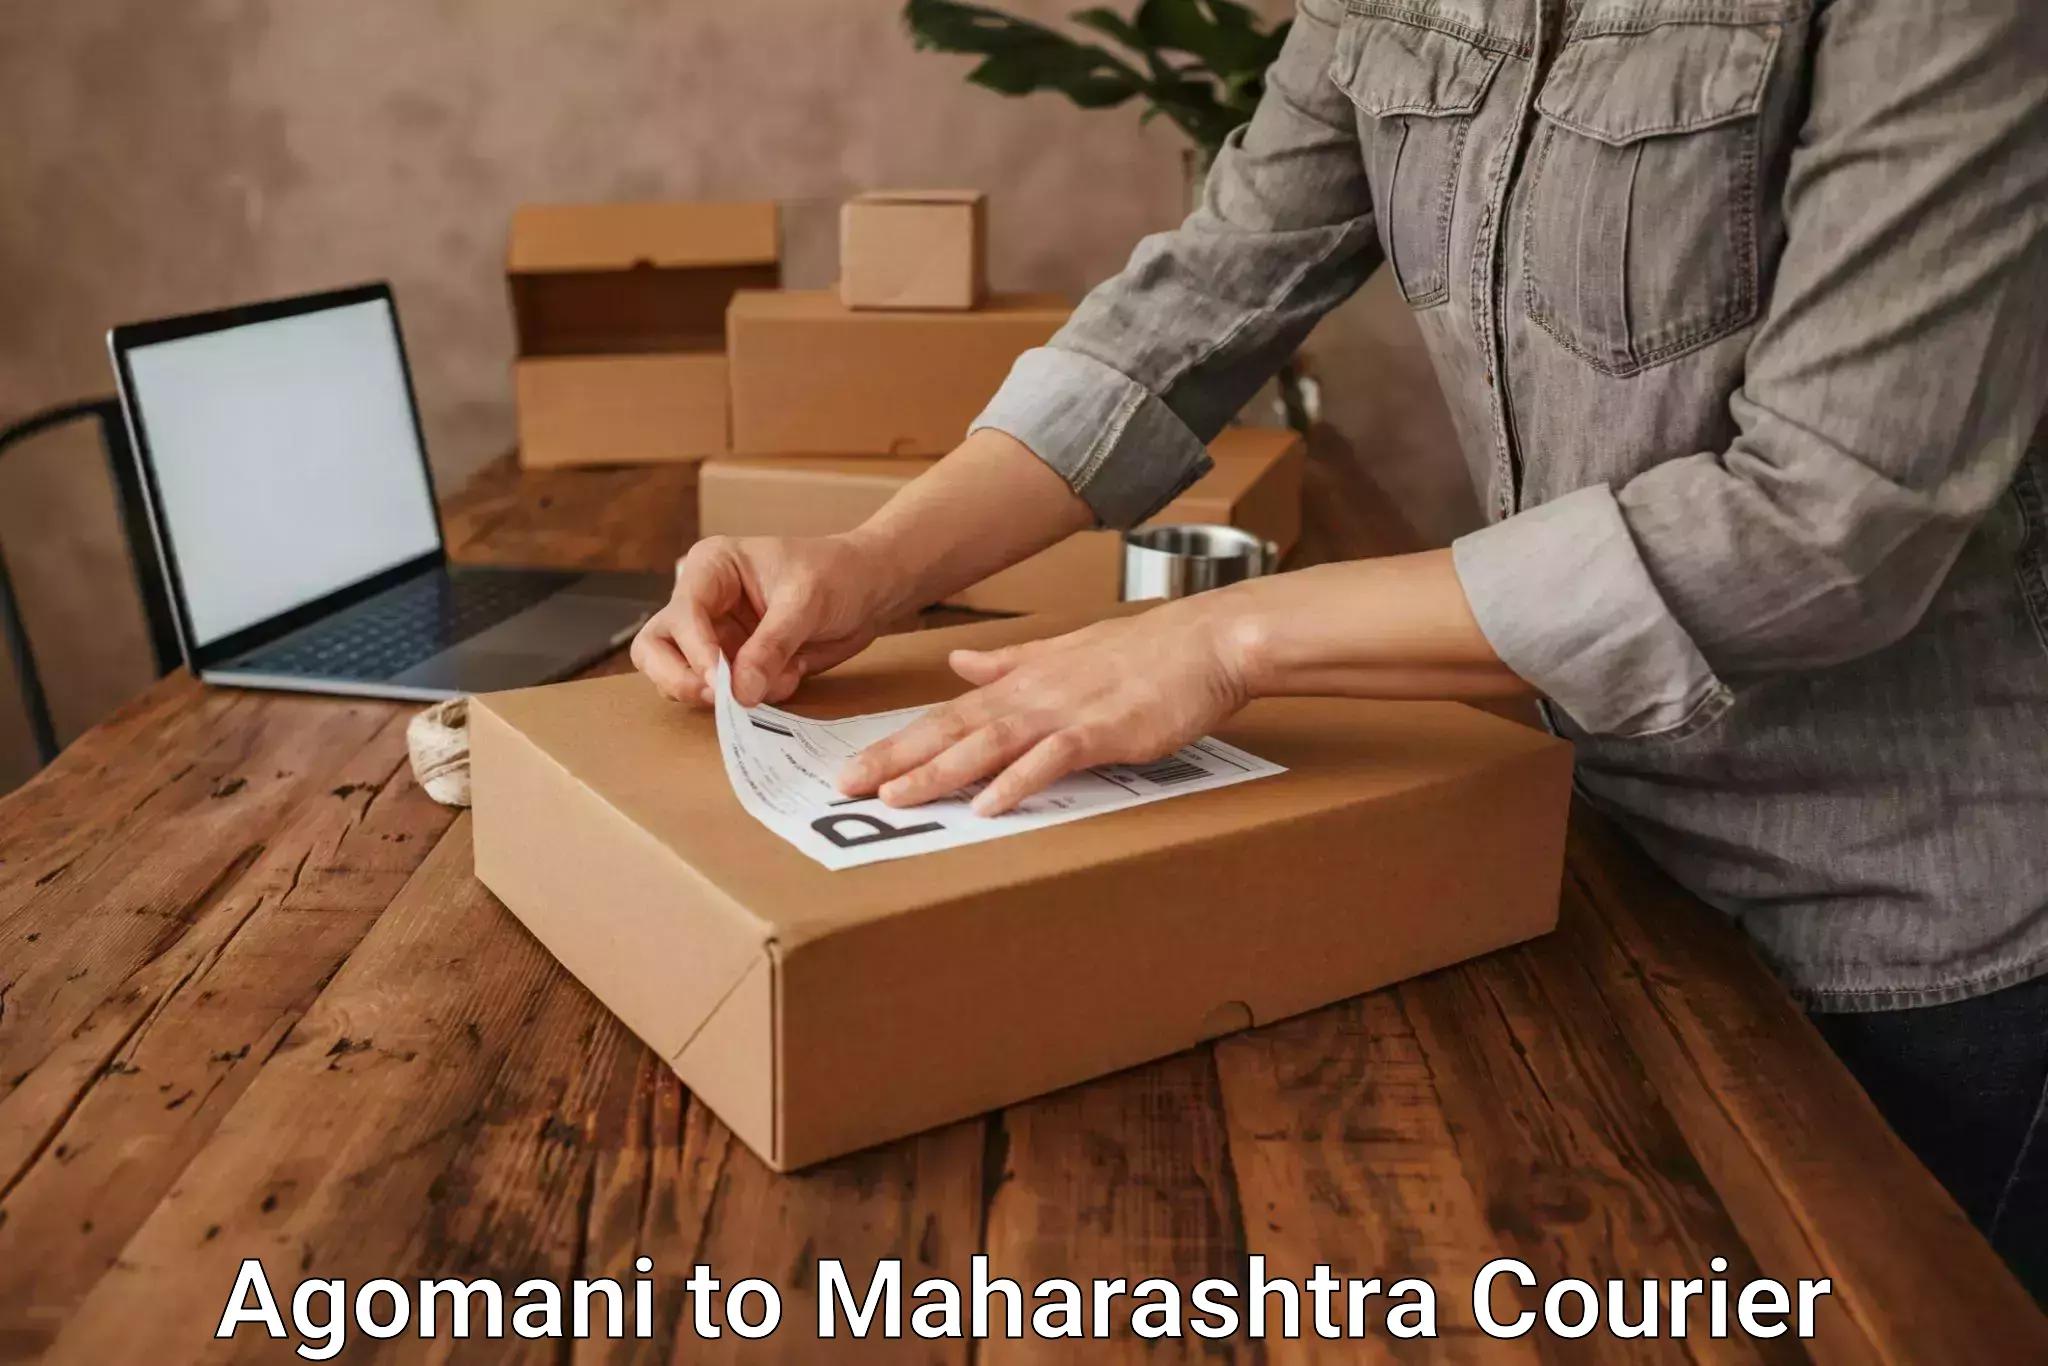 Courier insurance Agomani to Pune